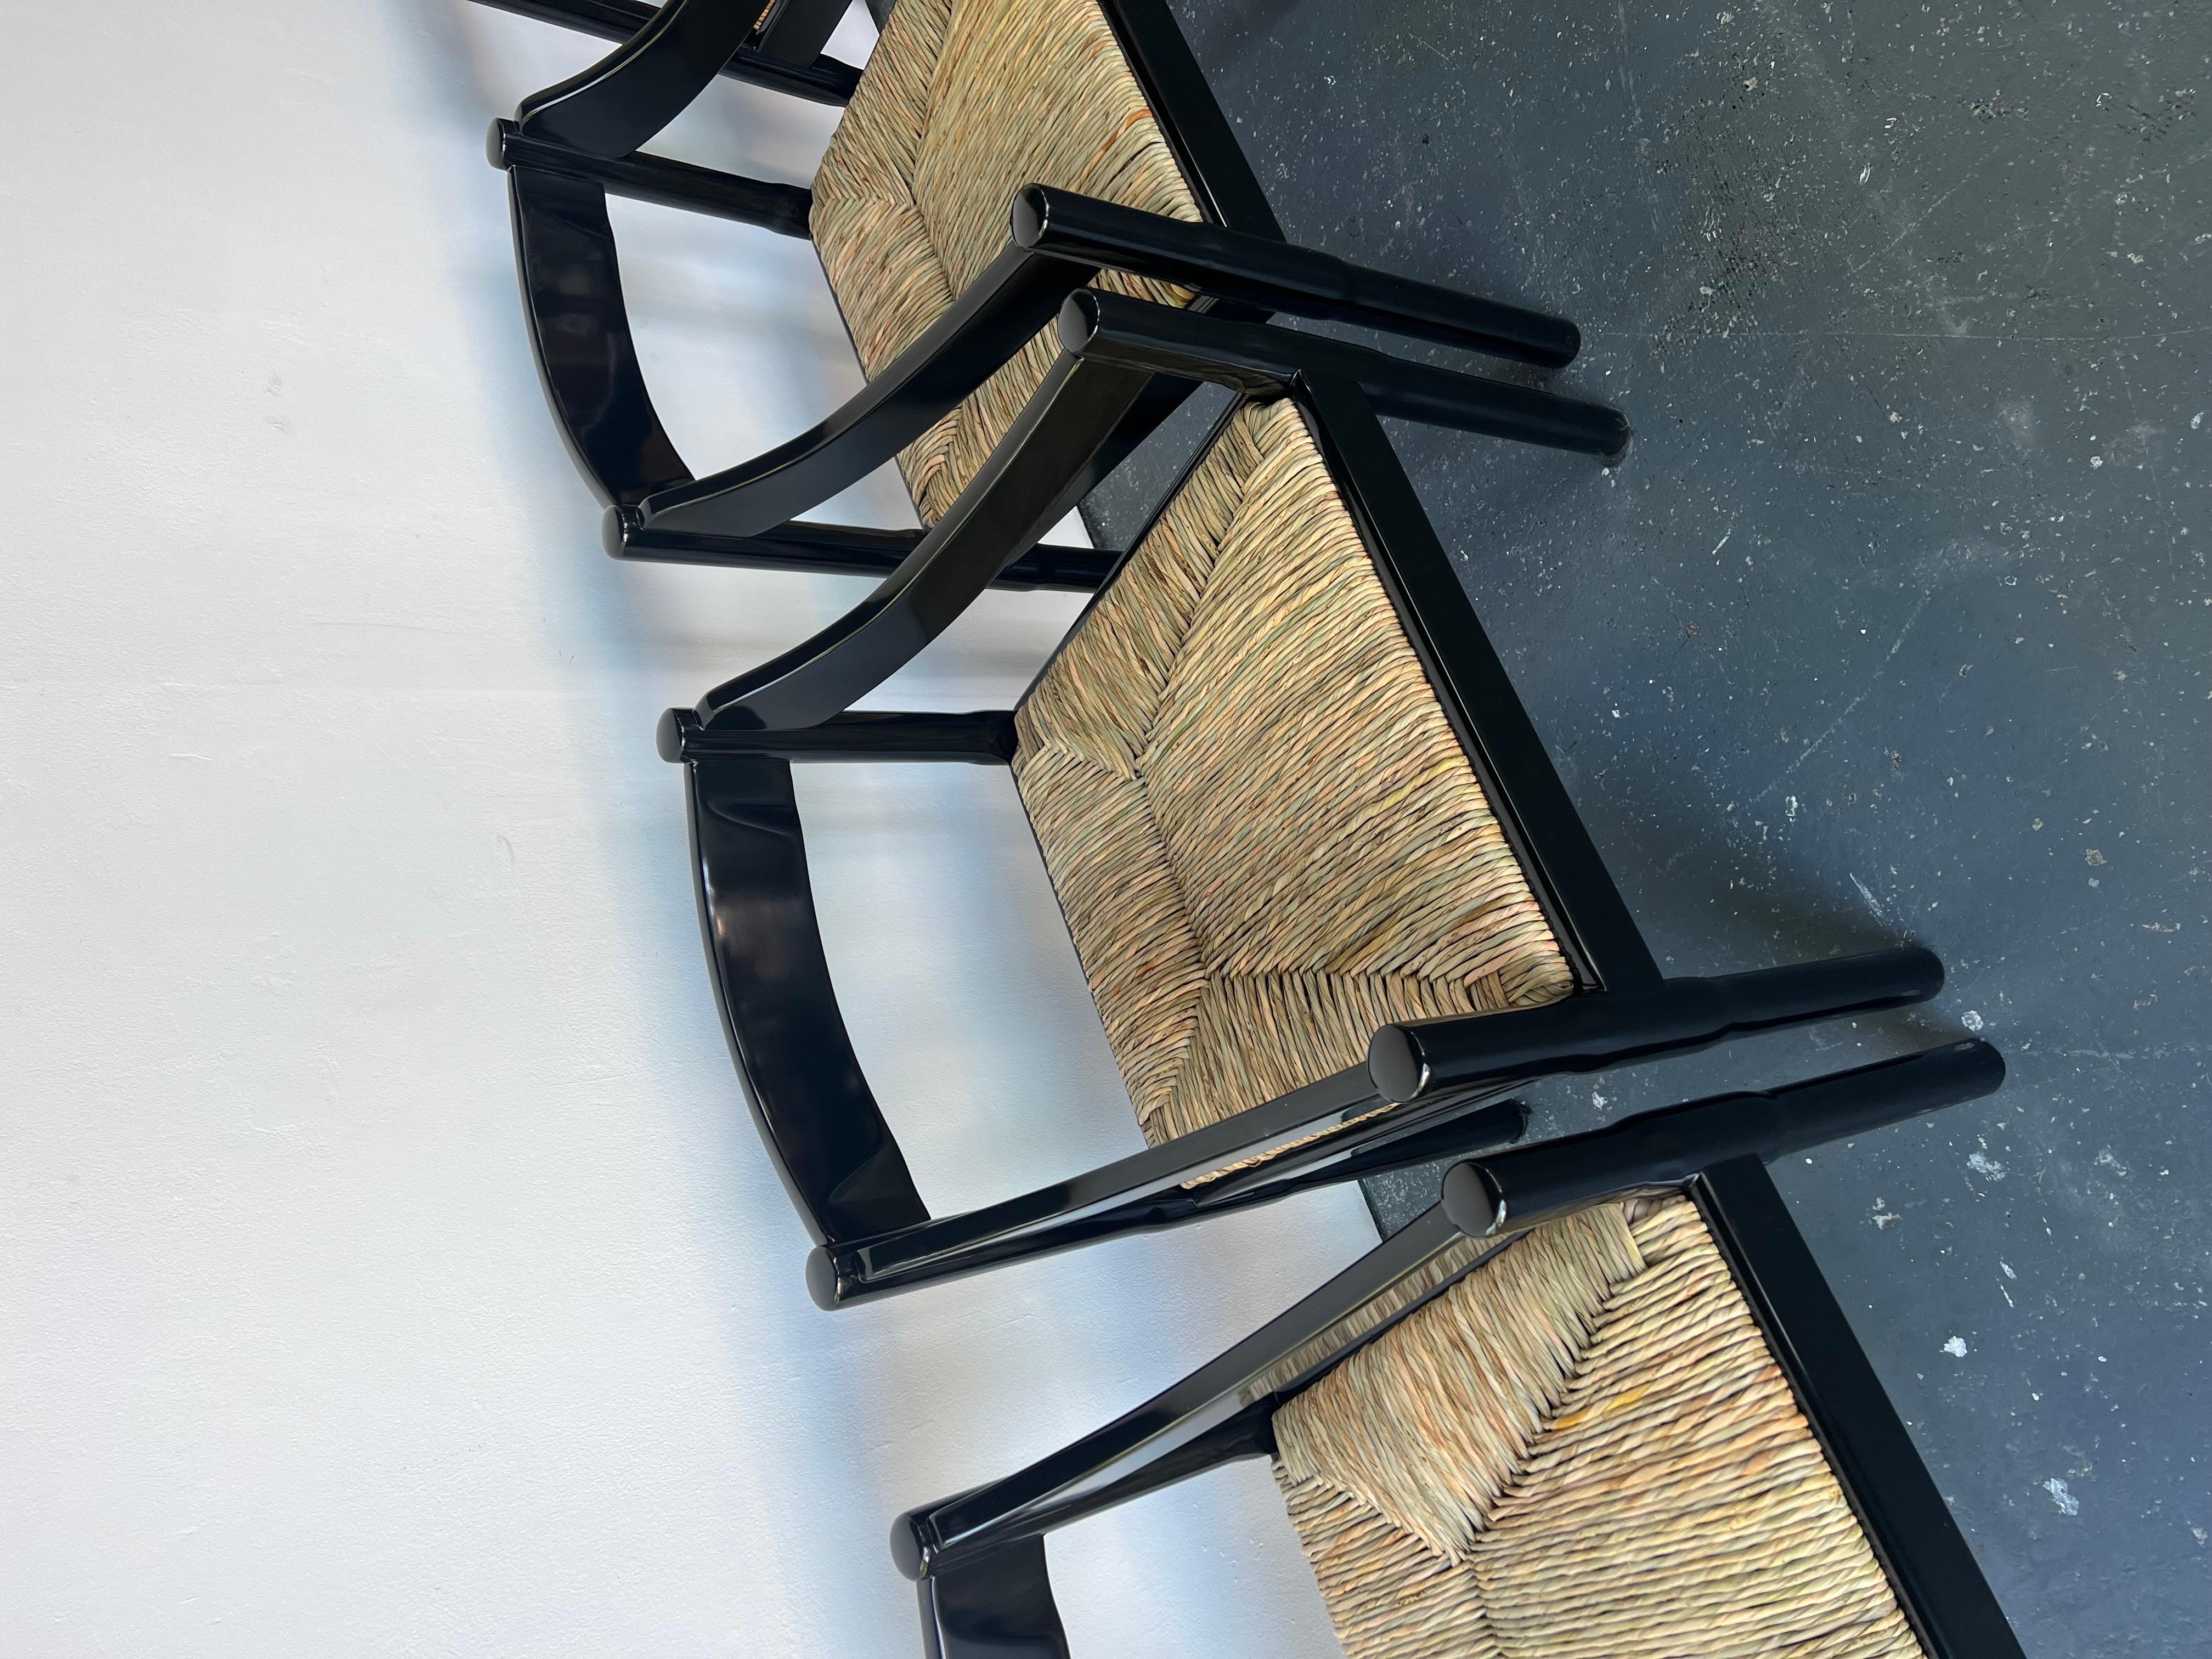 Set of x2 Glossy Black Carimate Carver Chairs by Vico Magistretti

The Carimate chair was born when Vico Magistretti (1920-2006) was conceiving designs for seating at the Carimate golf club in Italy in 1959. The design, which combines traditional